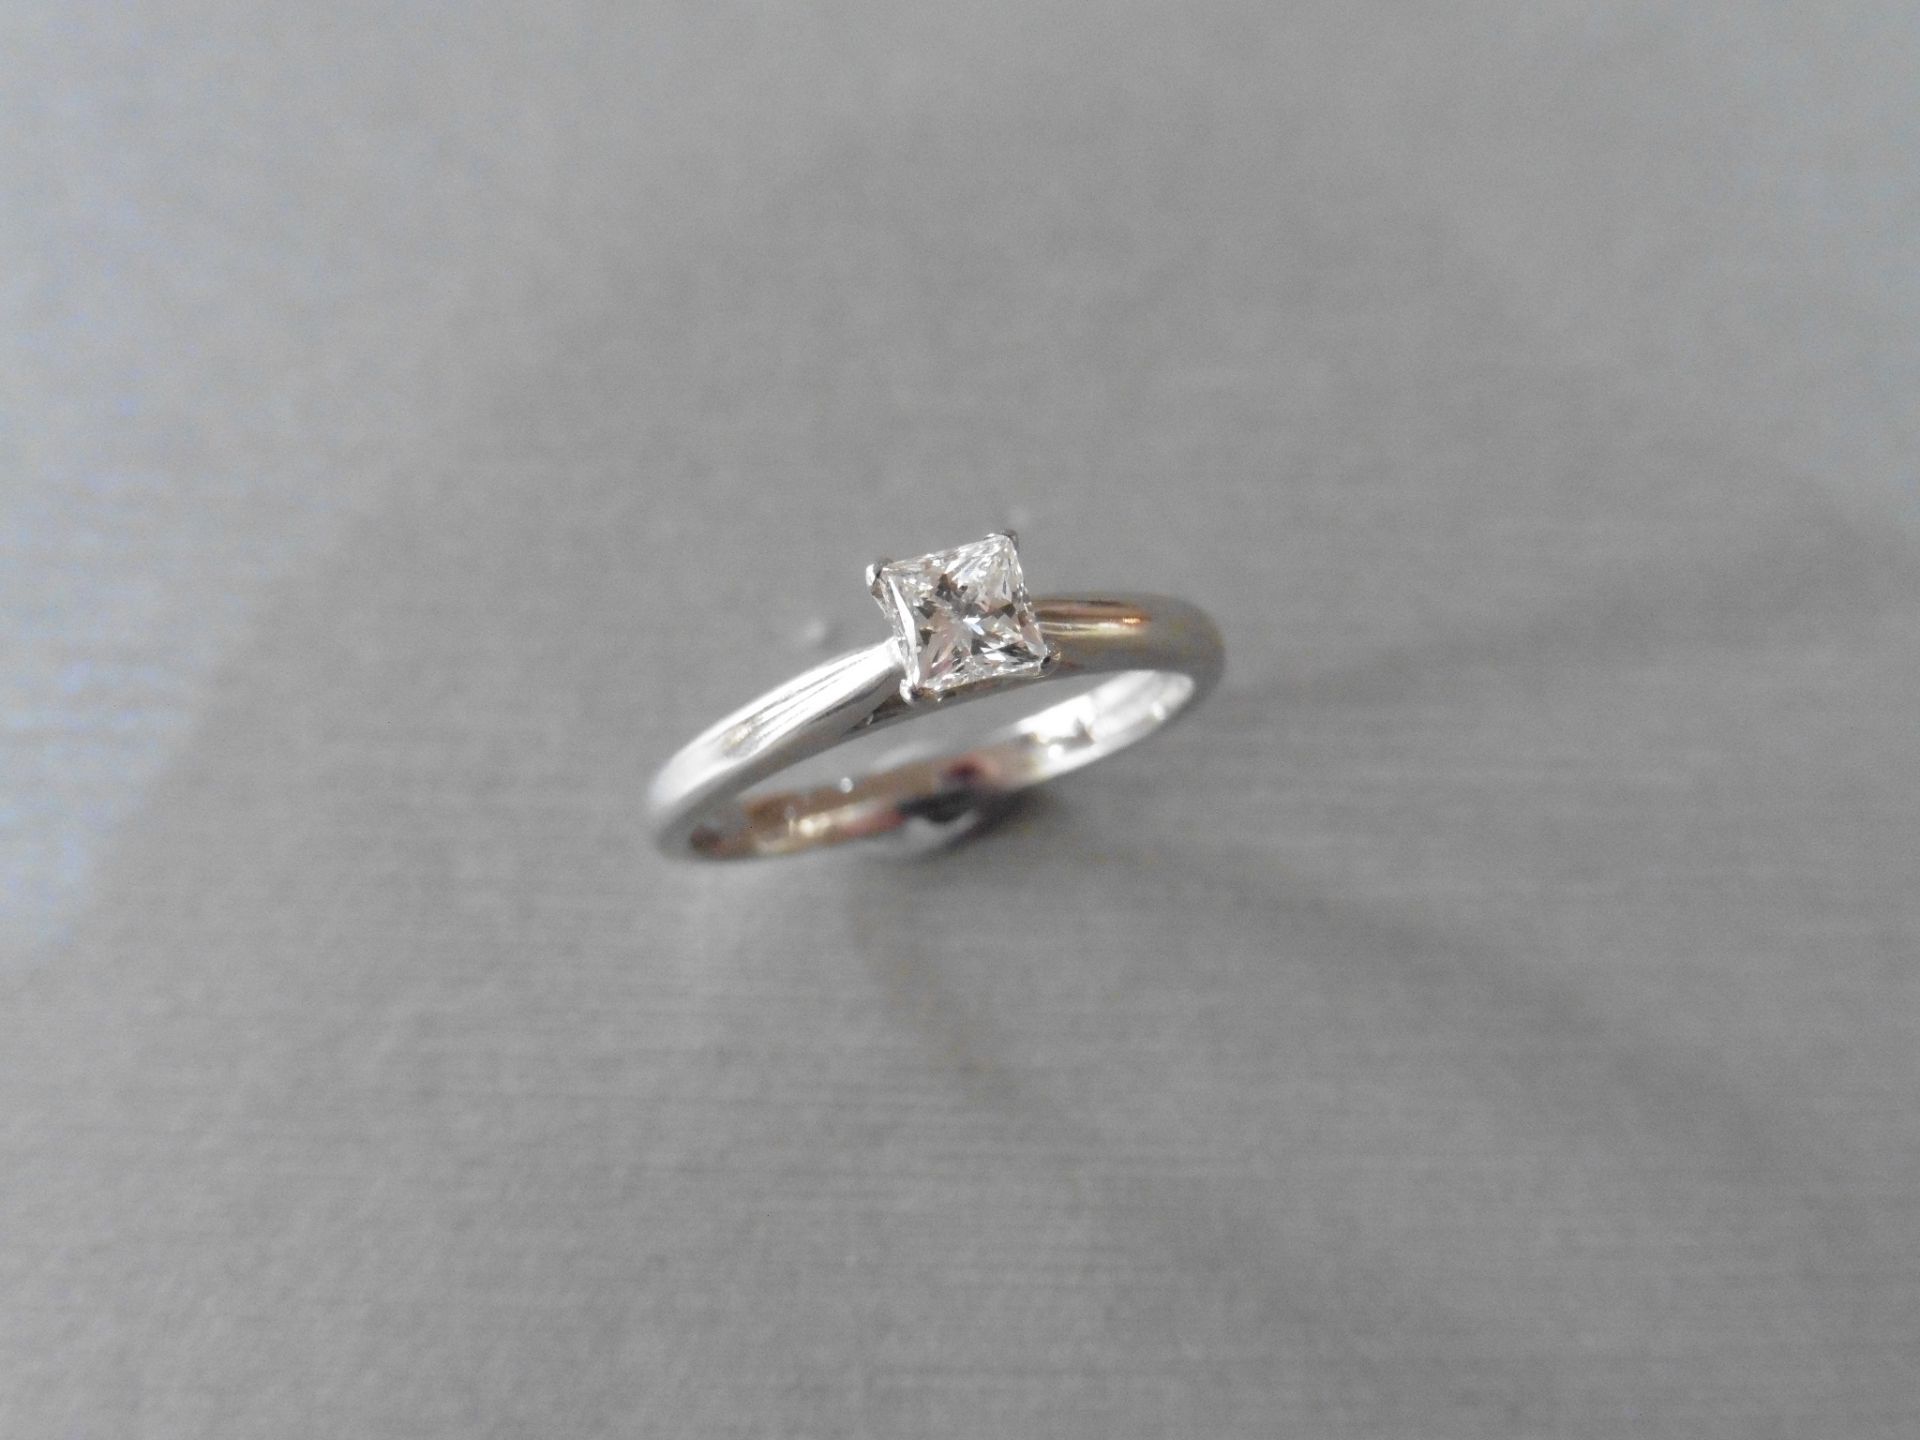 18ct gold diamond solitaire ring set with a 0.32ct princess cut diamond of I colour and VS